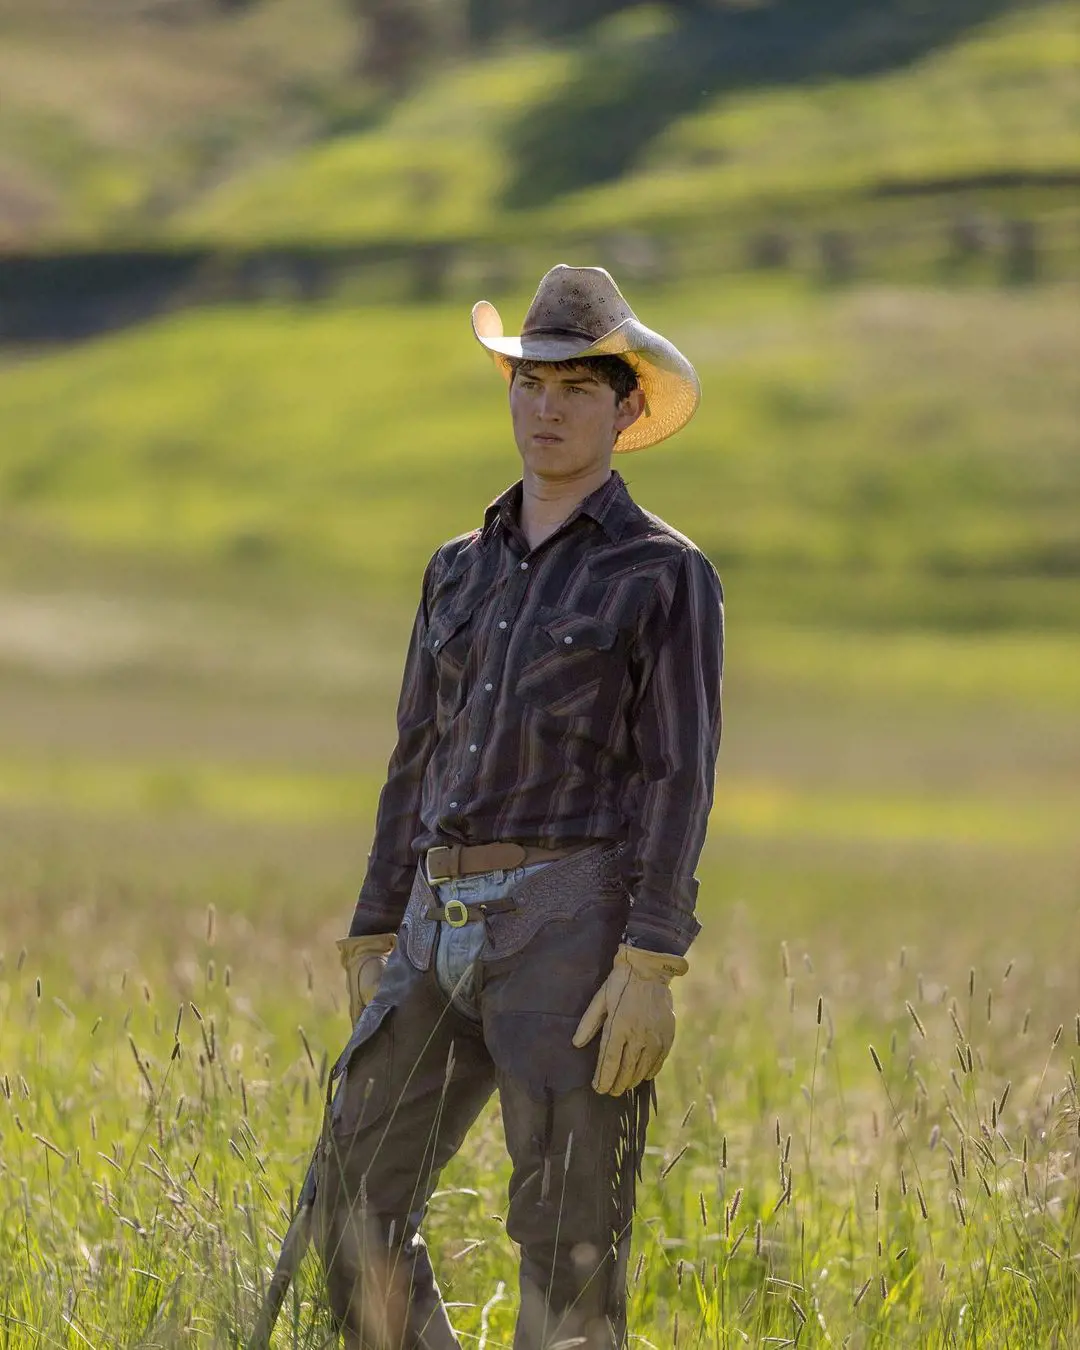 Kyle returned to the series in the role of Young Rip Wheeler in season five. The character served in Yellowstone Dutton Ranch for many years.